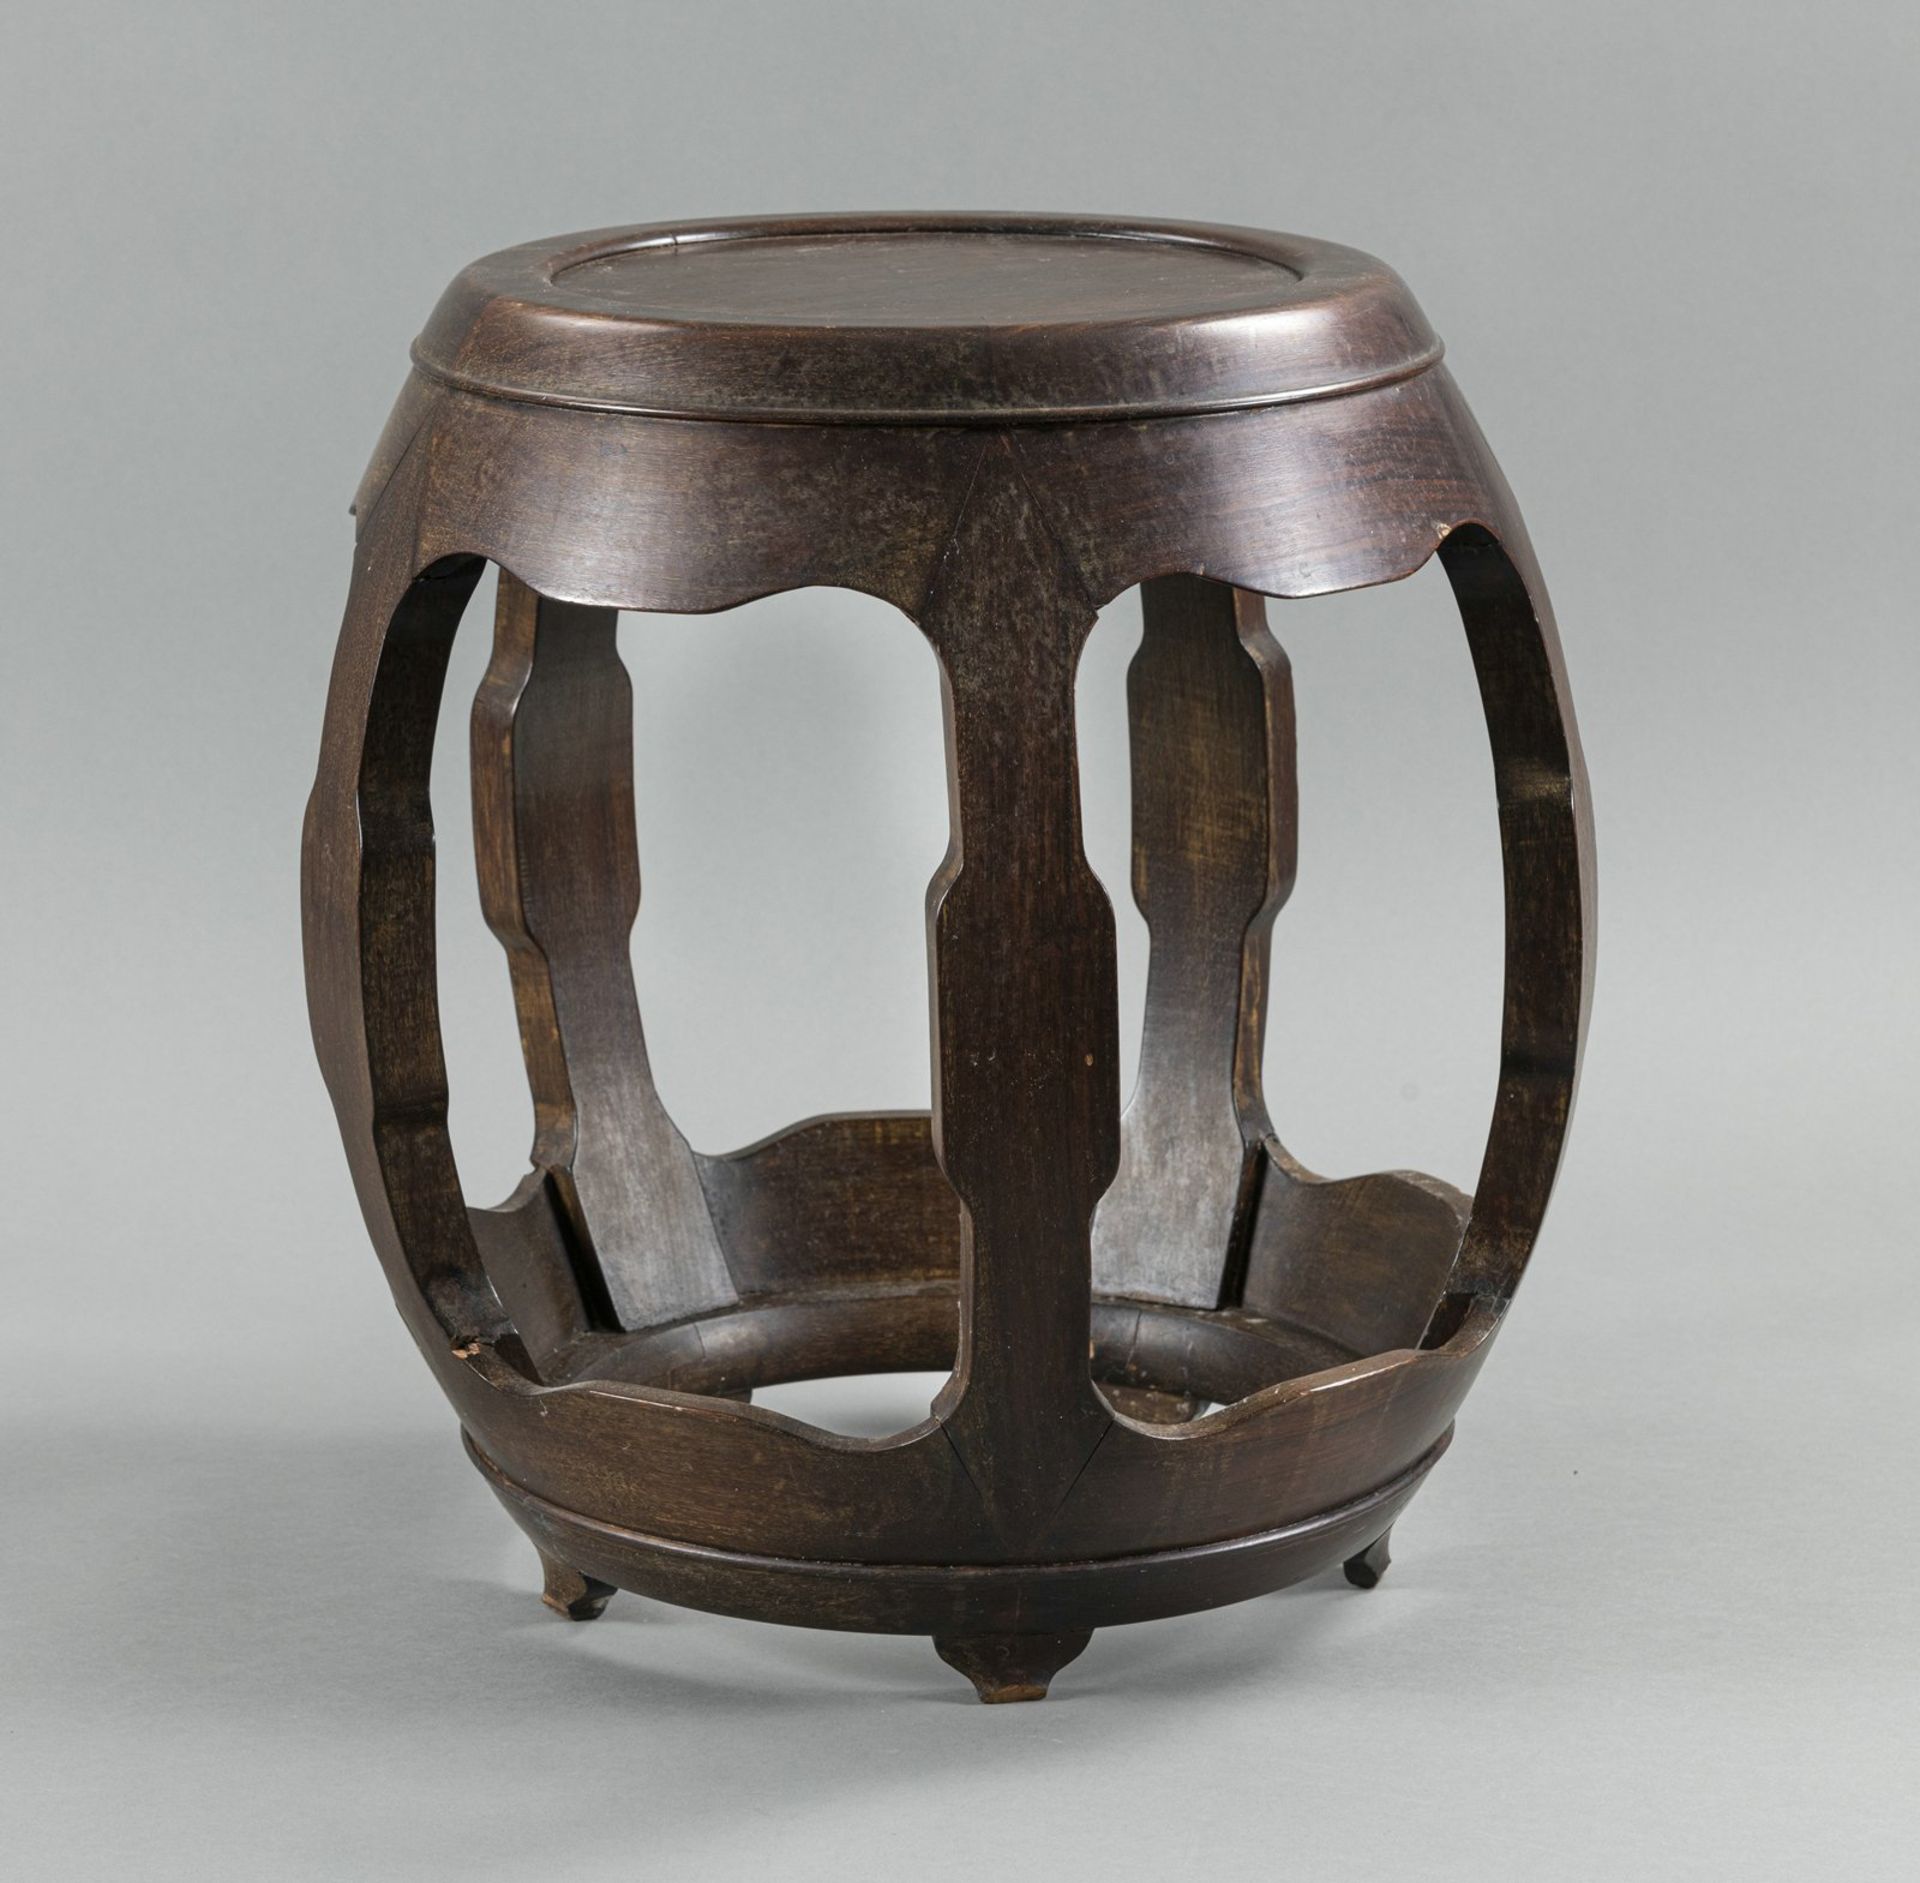 A DRUM-SHAPED STOOL